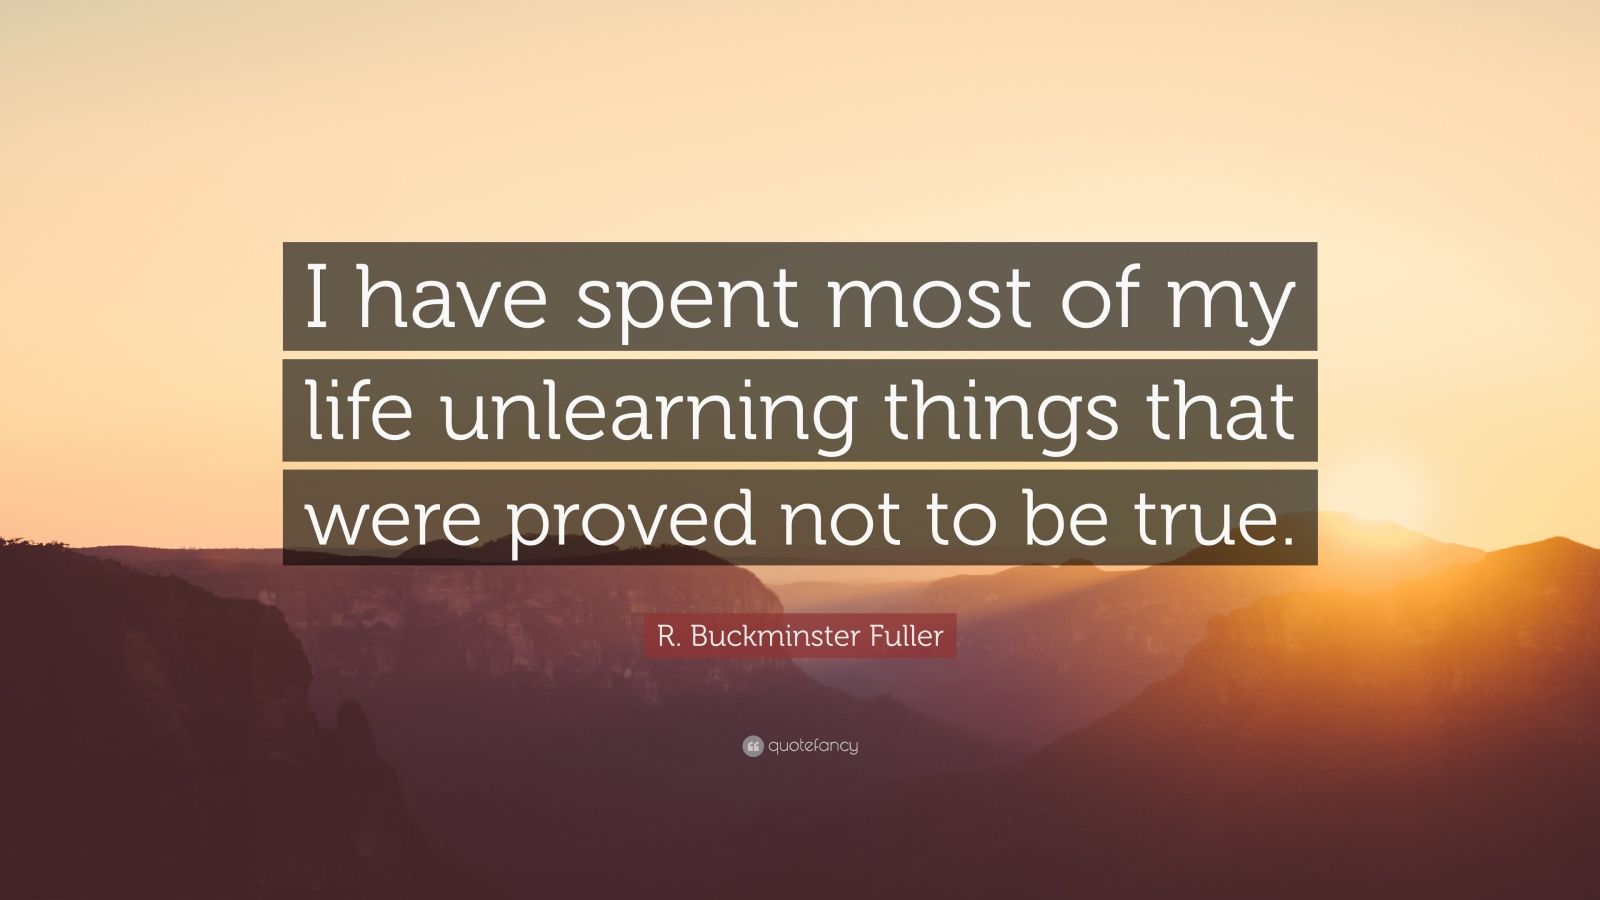 R. Buckminster Fuller Quote: “I have spent most of my life unlearning ...